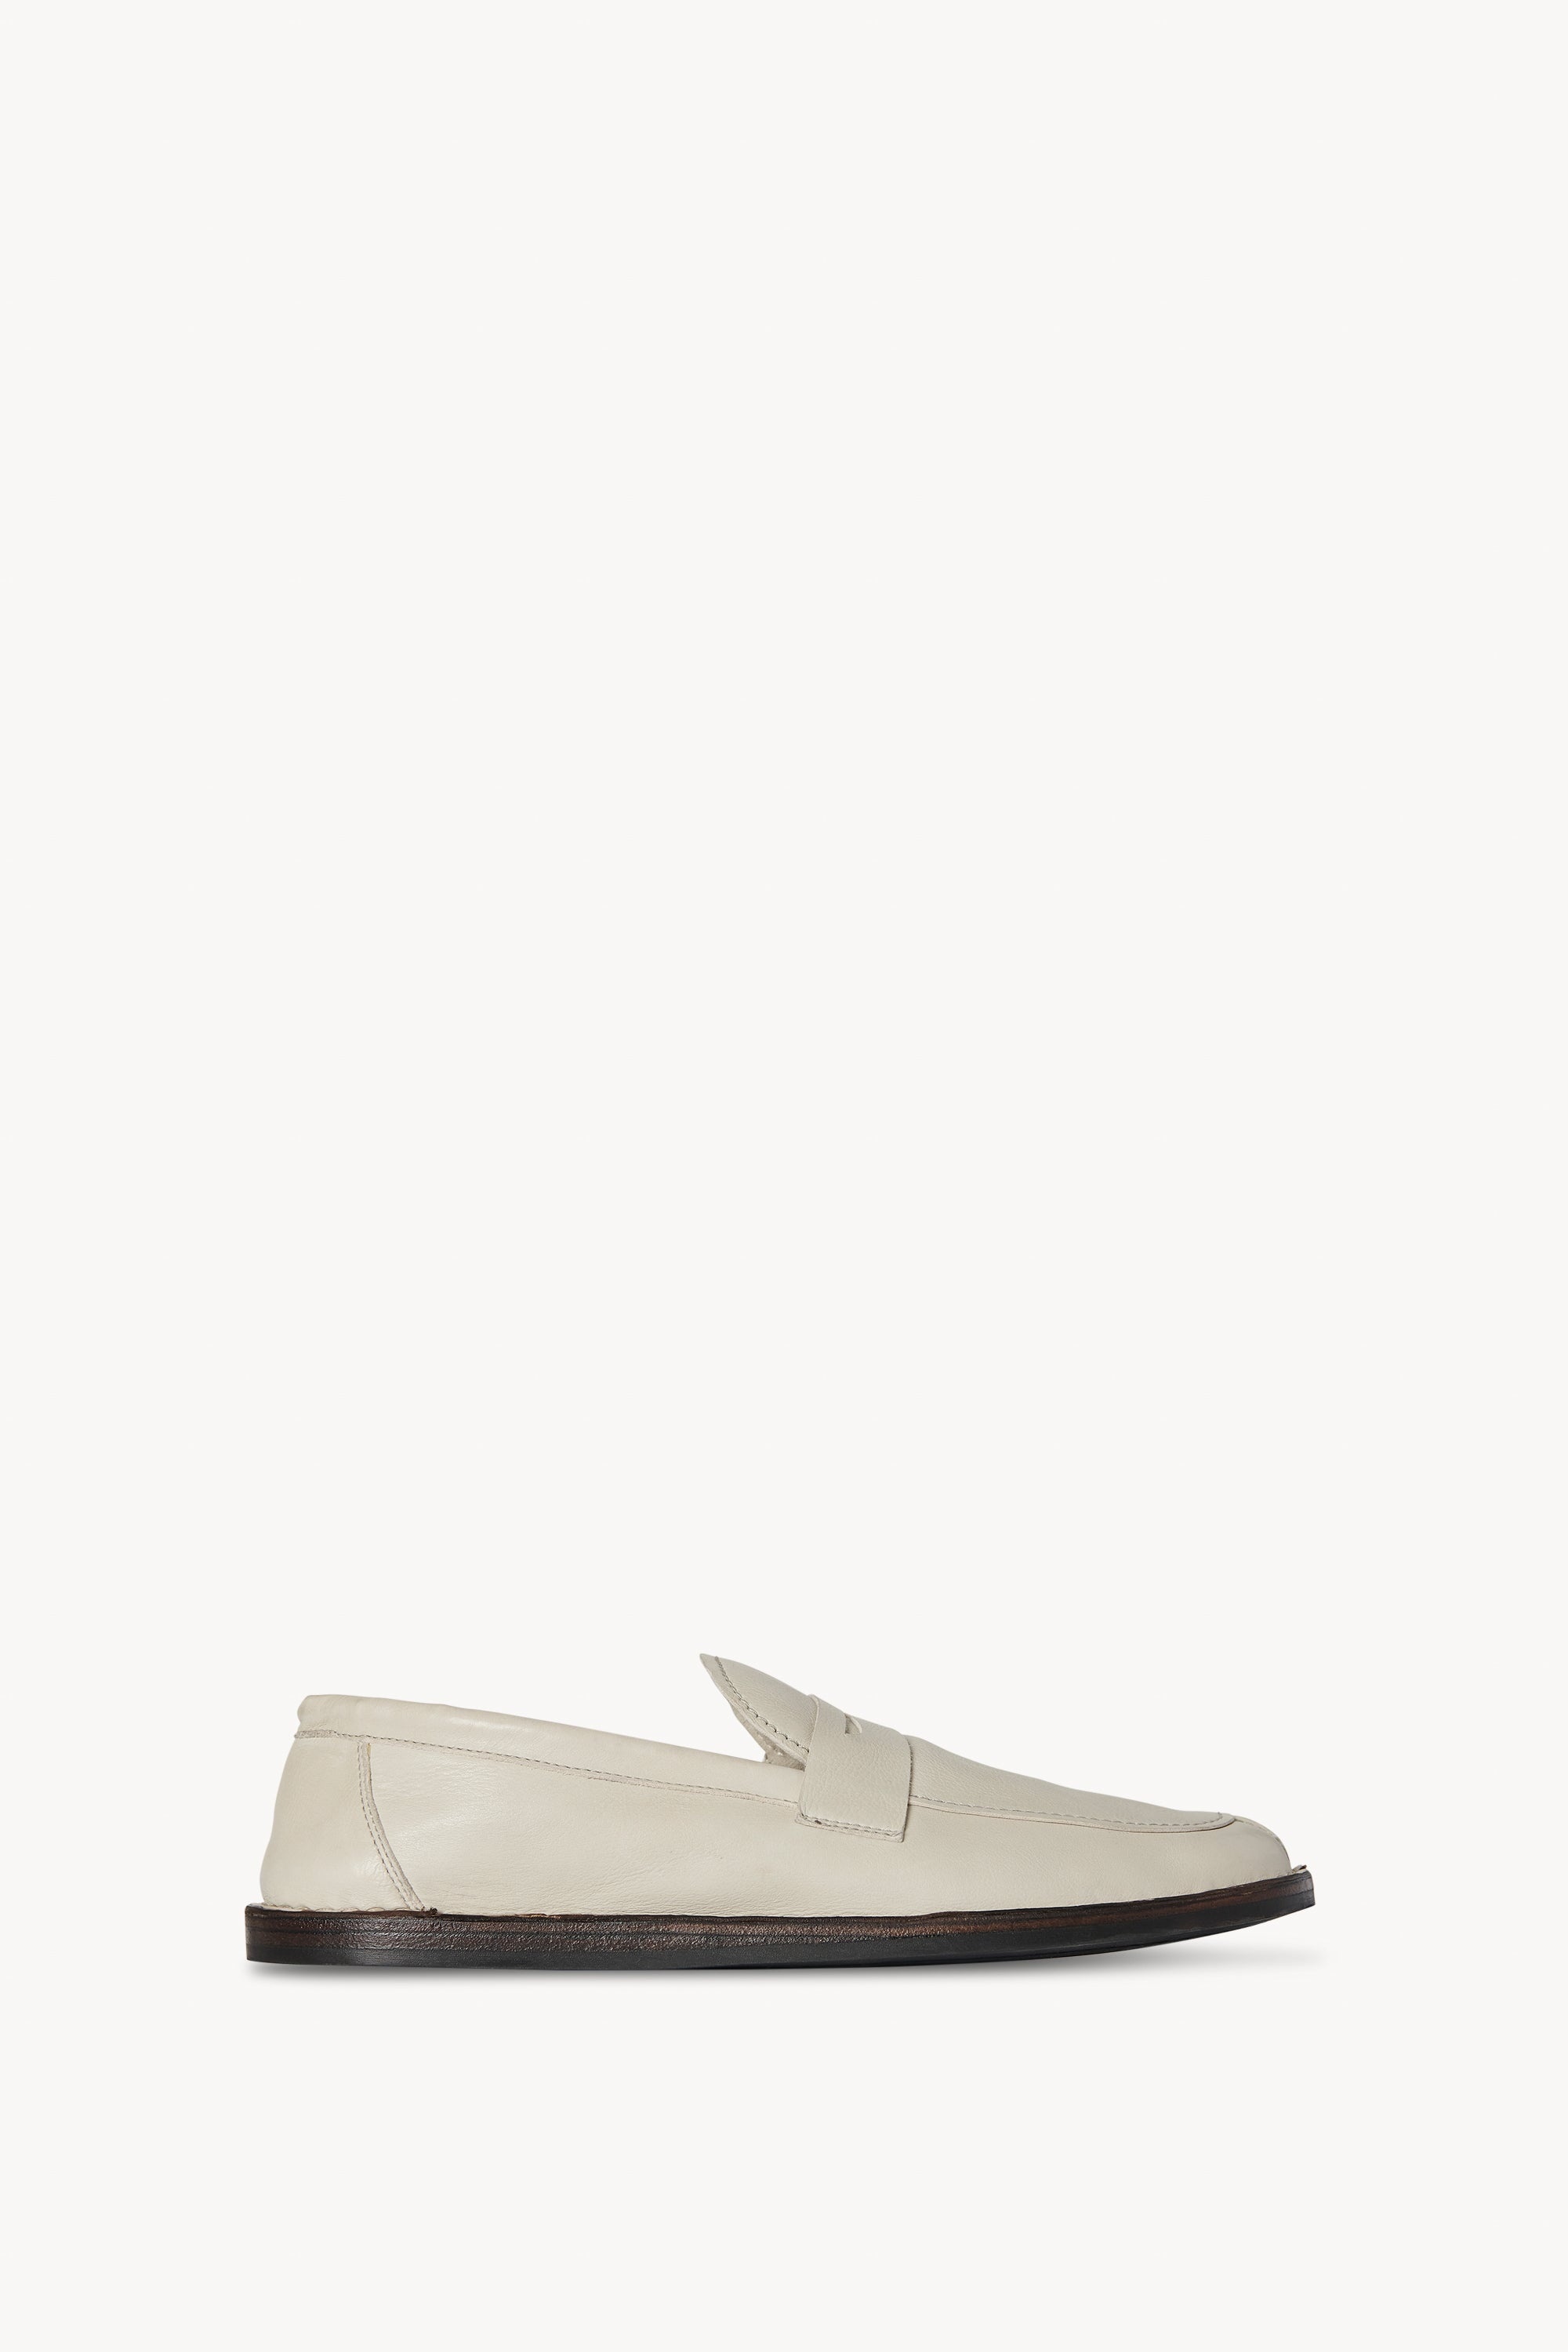 Cary Loafer in Leather - 1